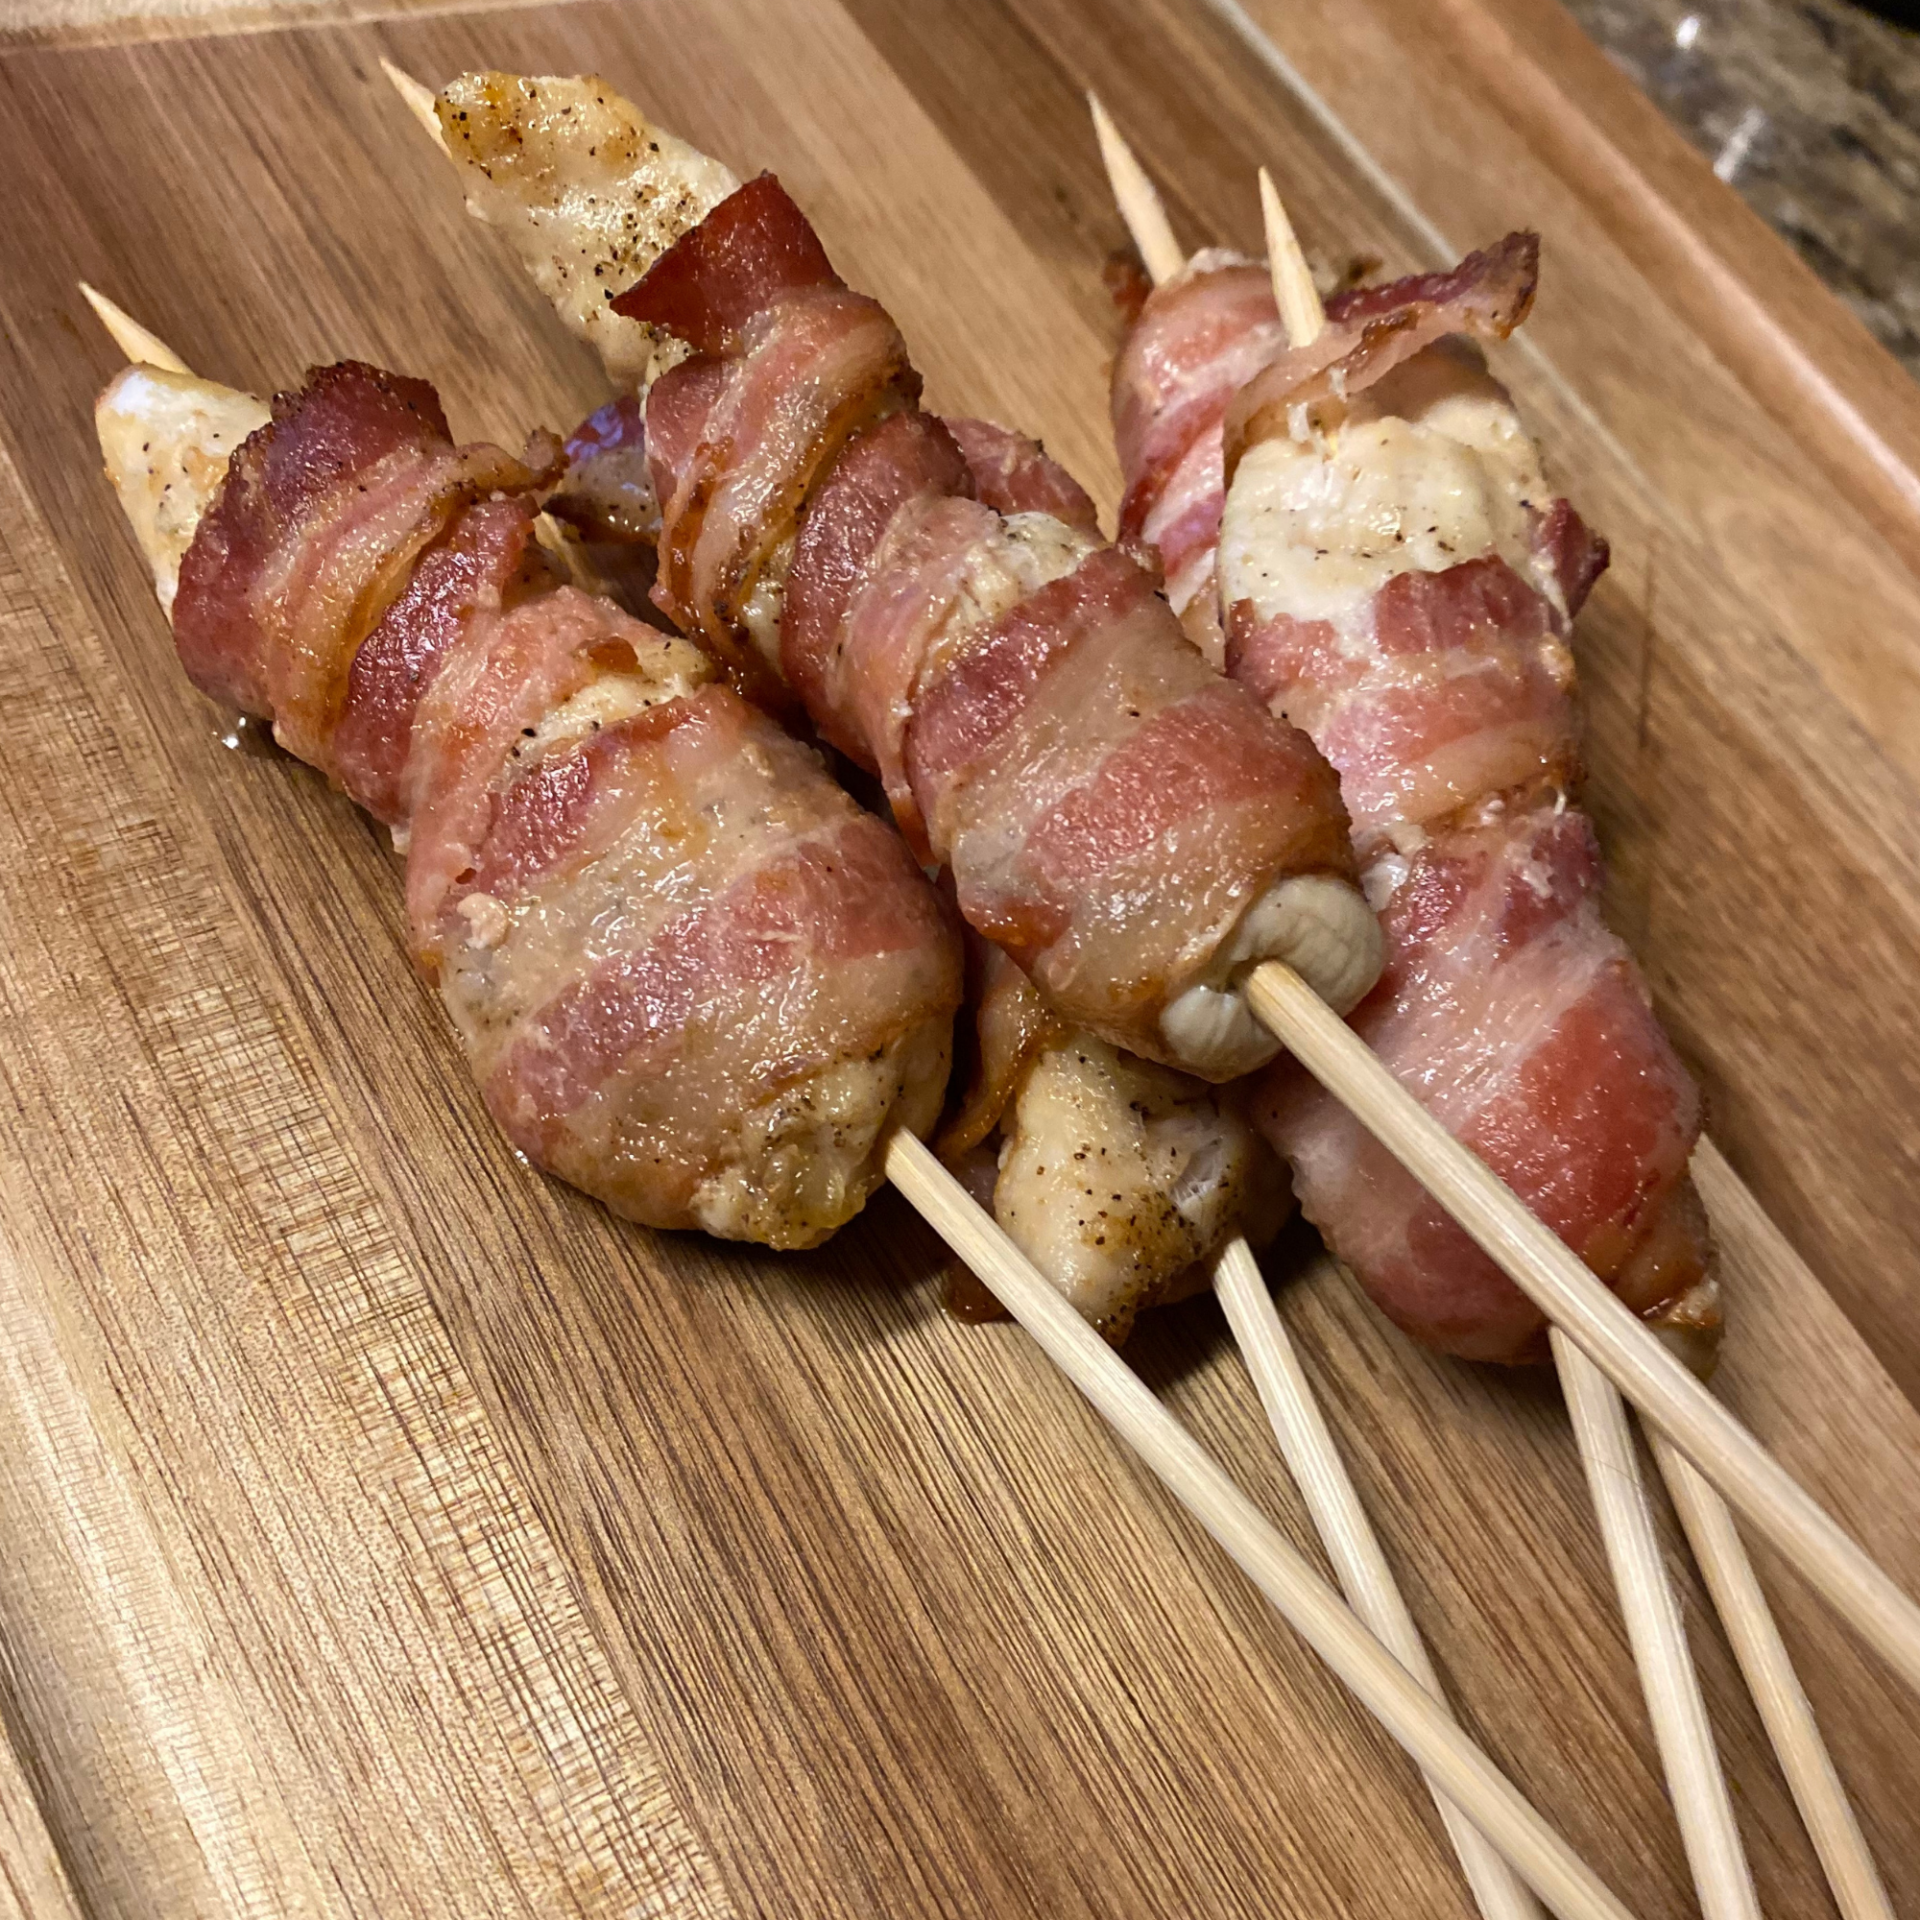 Try This Scrumptious Bacon Wrapped Chicken for Supper